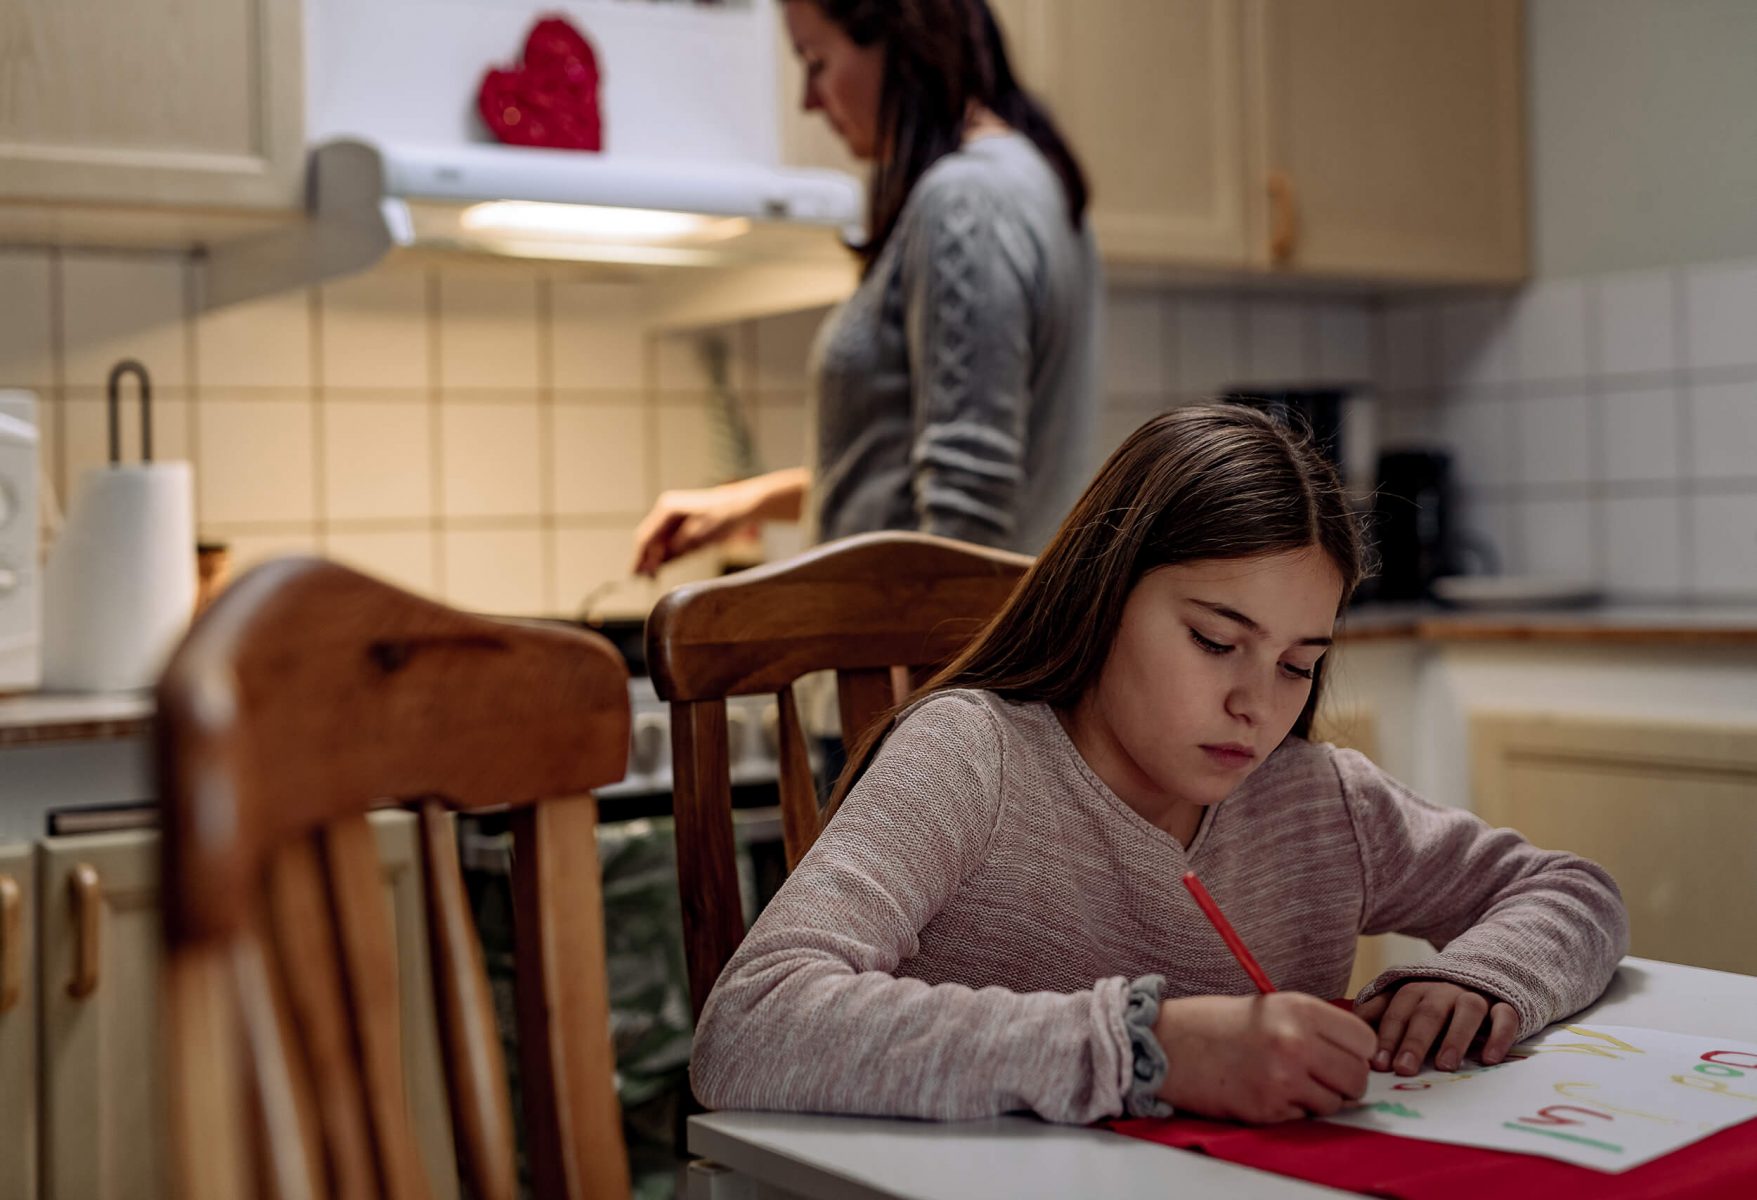 Kid making a Christmas card in kitchen. Looks bored and sad